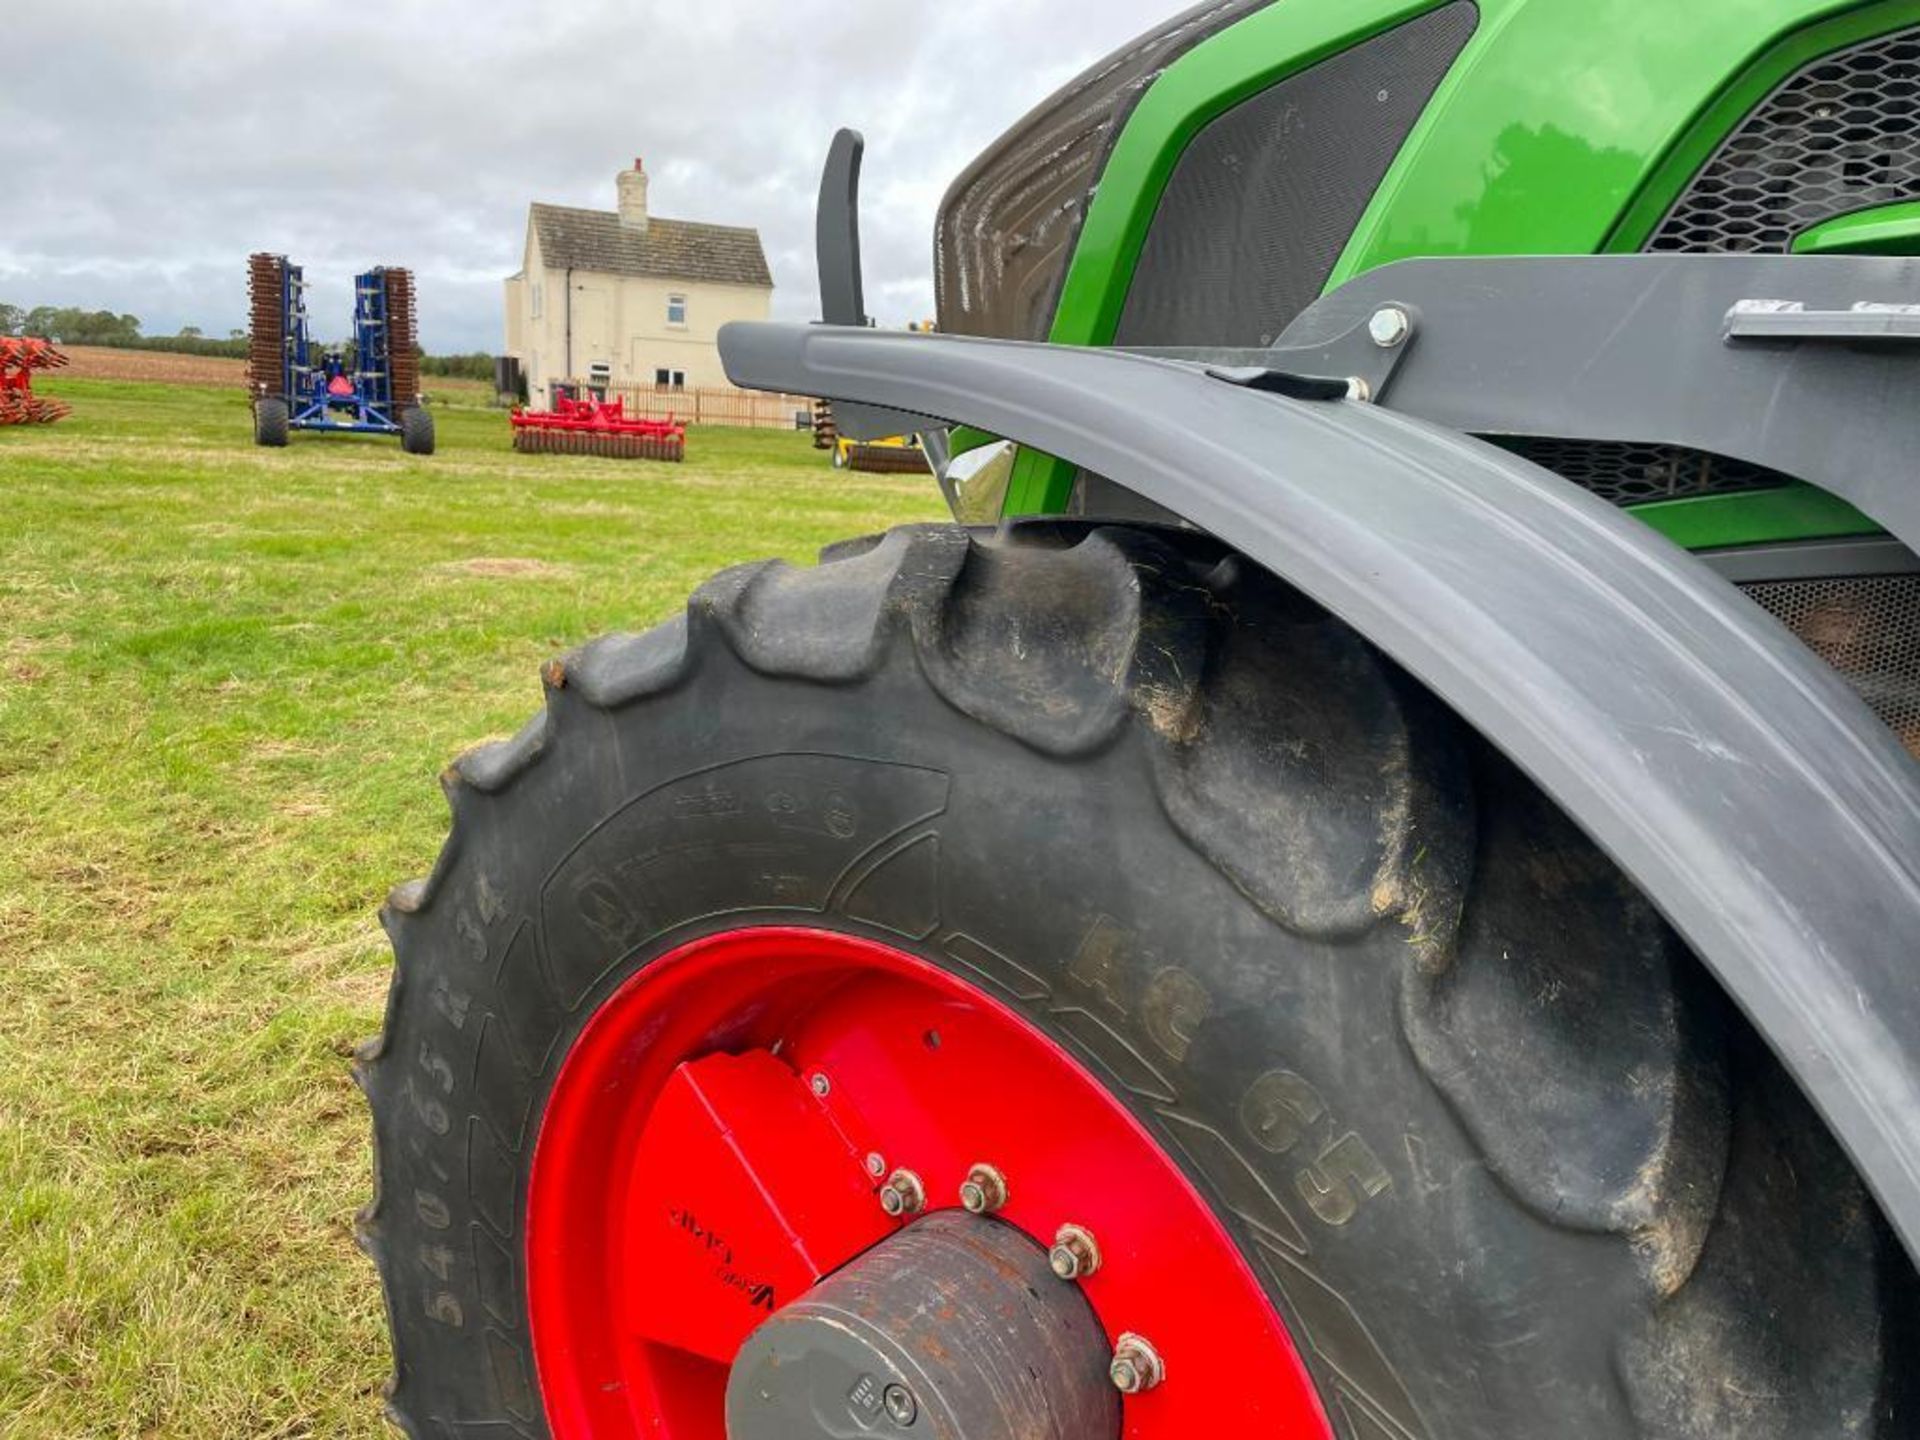 2018 Fendt 828 Vario Profi Plus 65kph 4wd tractor with Quicke Q8M front loader and pallet tines, fro - Image 19 of 29